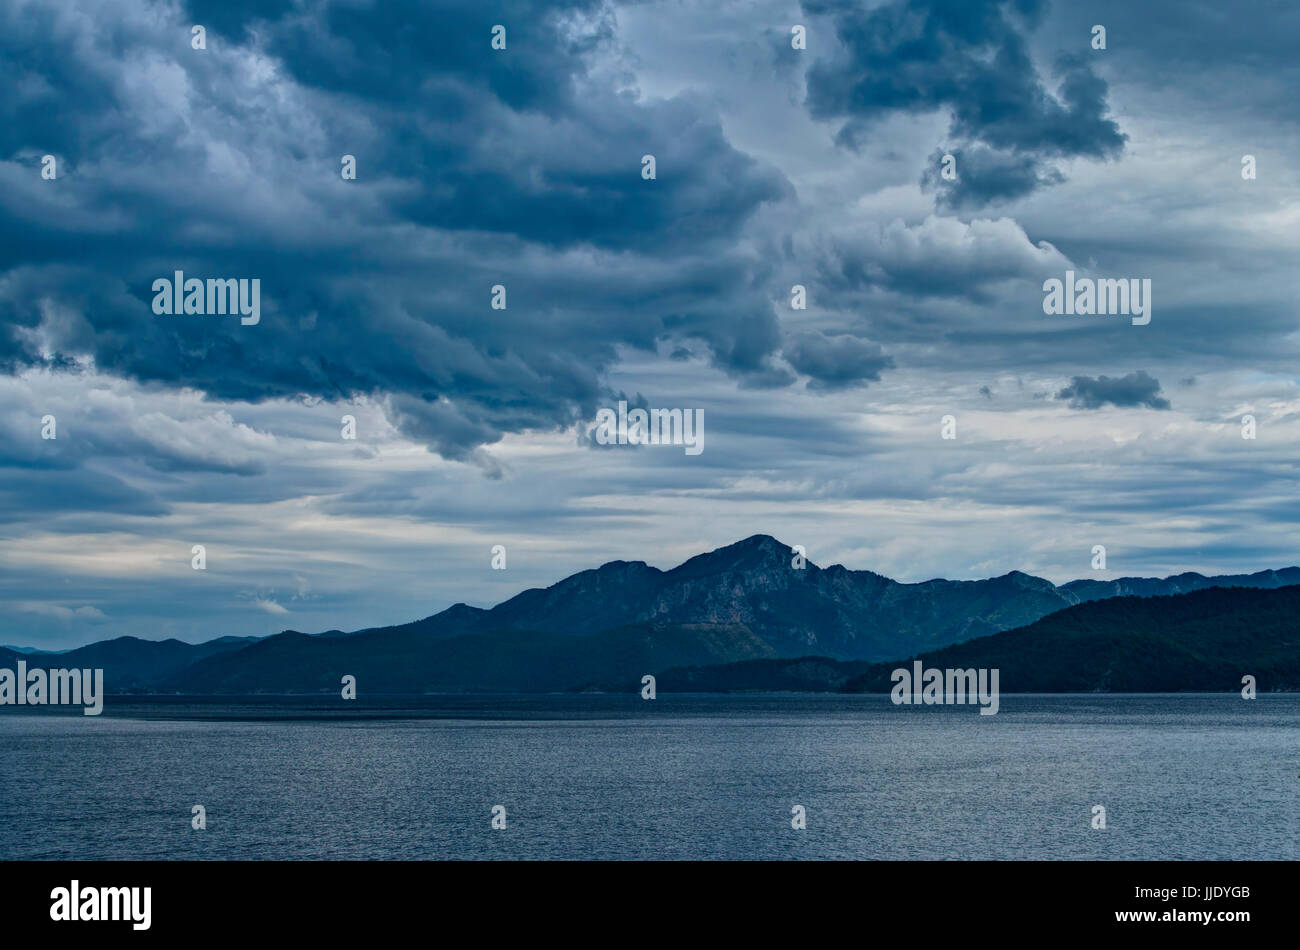 mountain range on island and Aegean sea during thunderstorm with dark dramatic clouds, Turkey Stock Photo